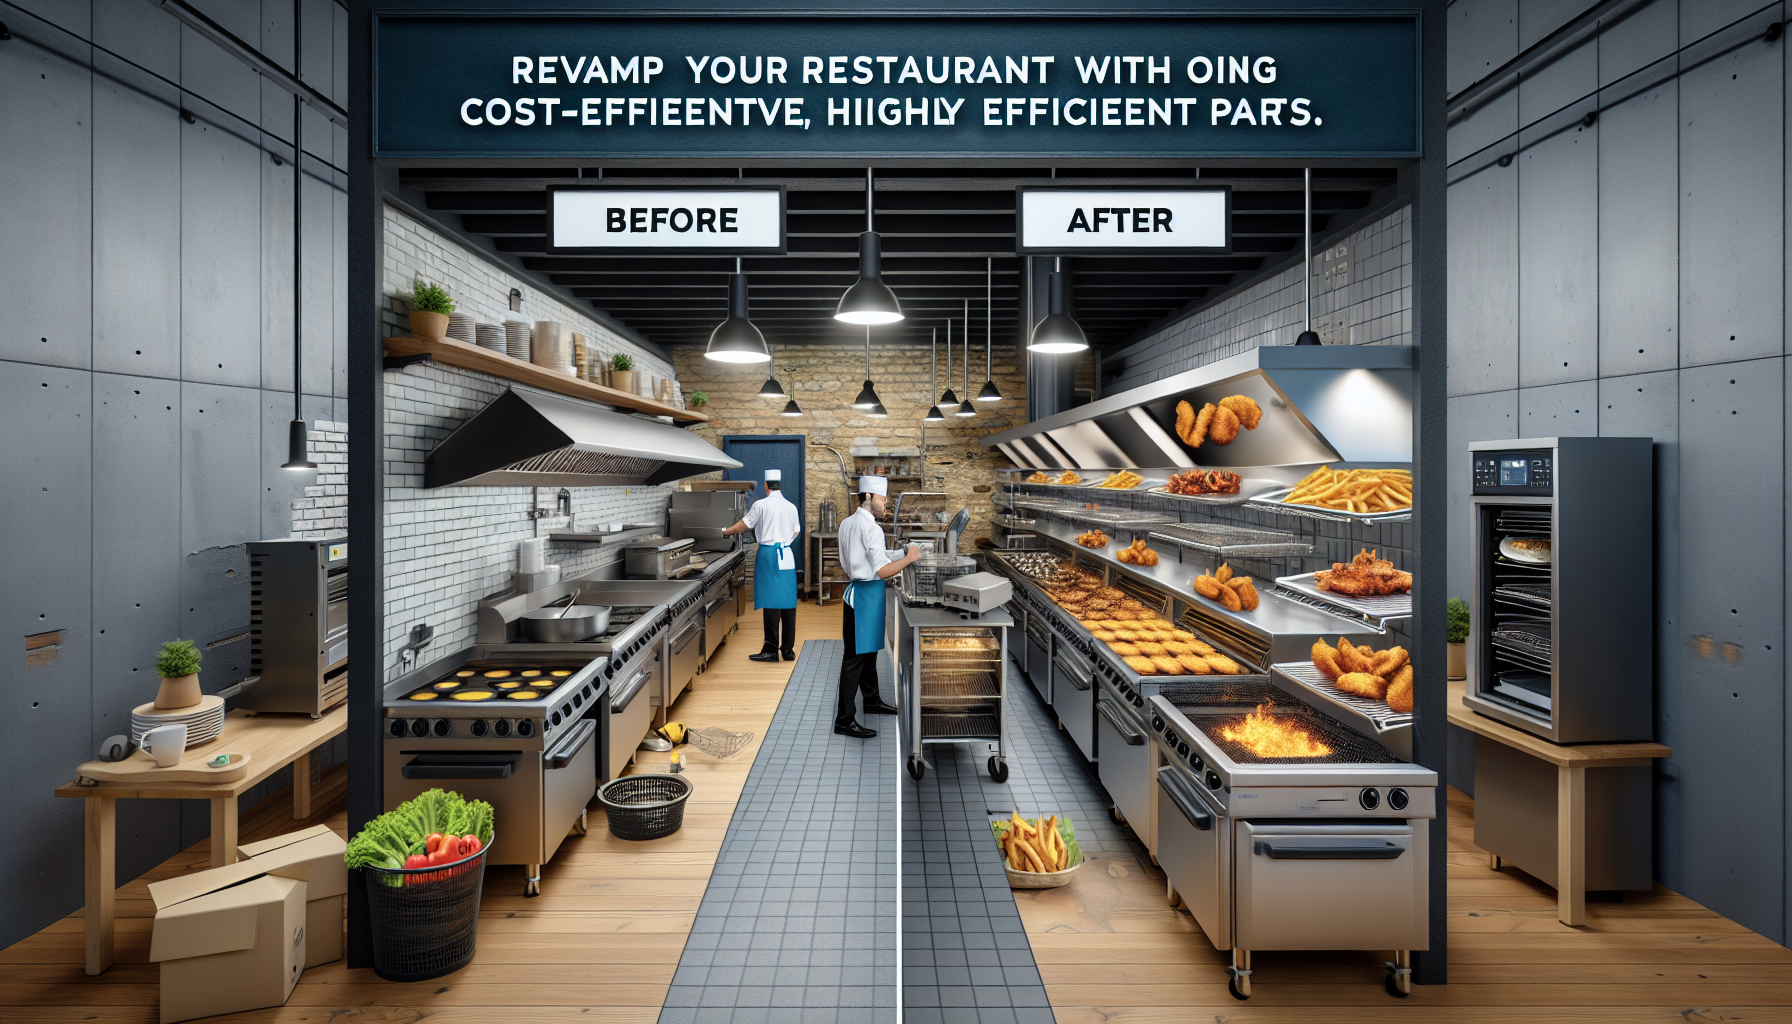 Revitalize Your Restaurant with Budget-Friendly, High-Performance Equipment Parts from Parts-Points